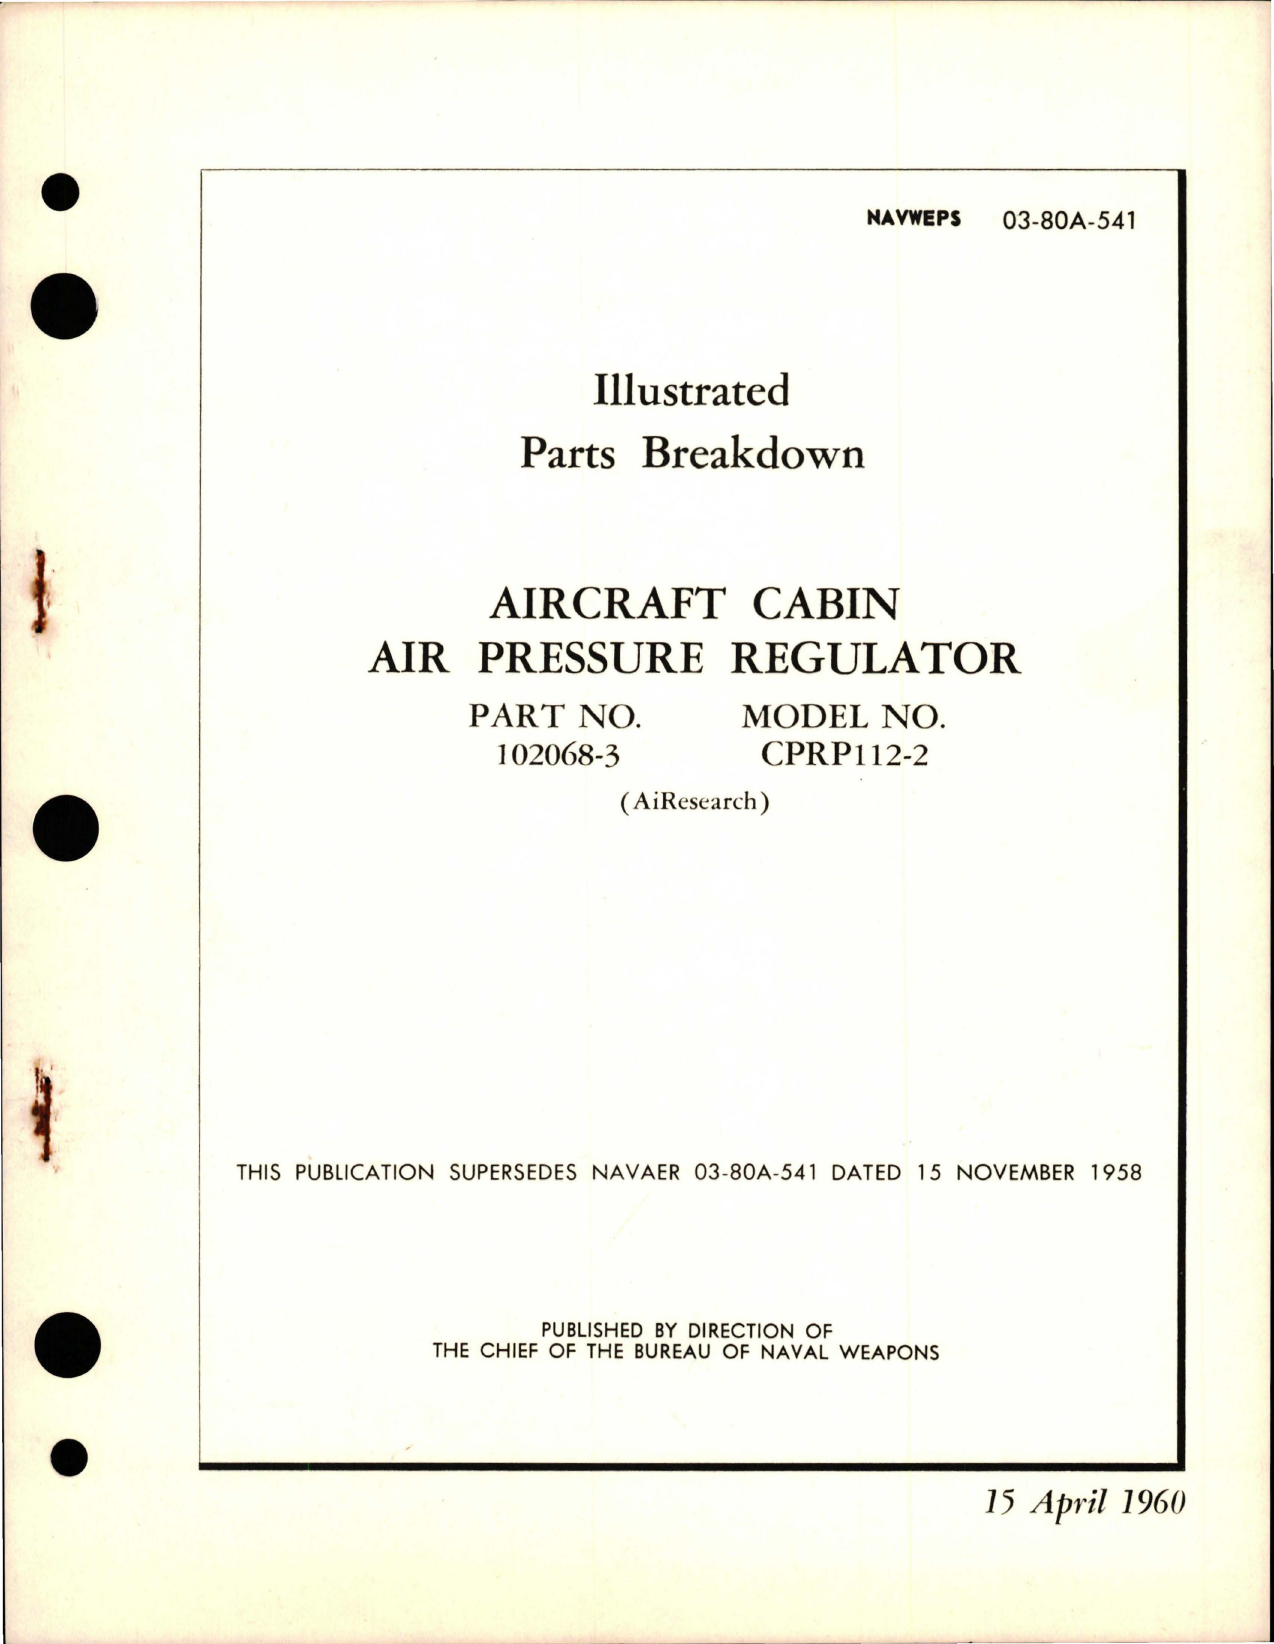 Sample page 1 from AirCorps Library document: Illustrated Parts Breakdown for Aircraft Cabin Air Pressure Regulator - Part 102068-3 - Model CPRP112-2